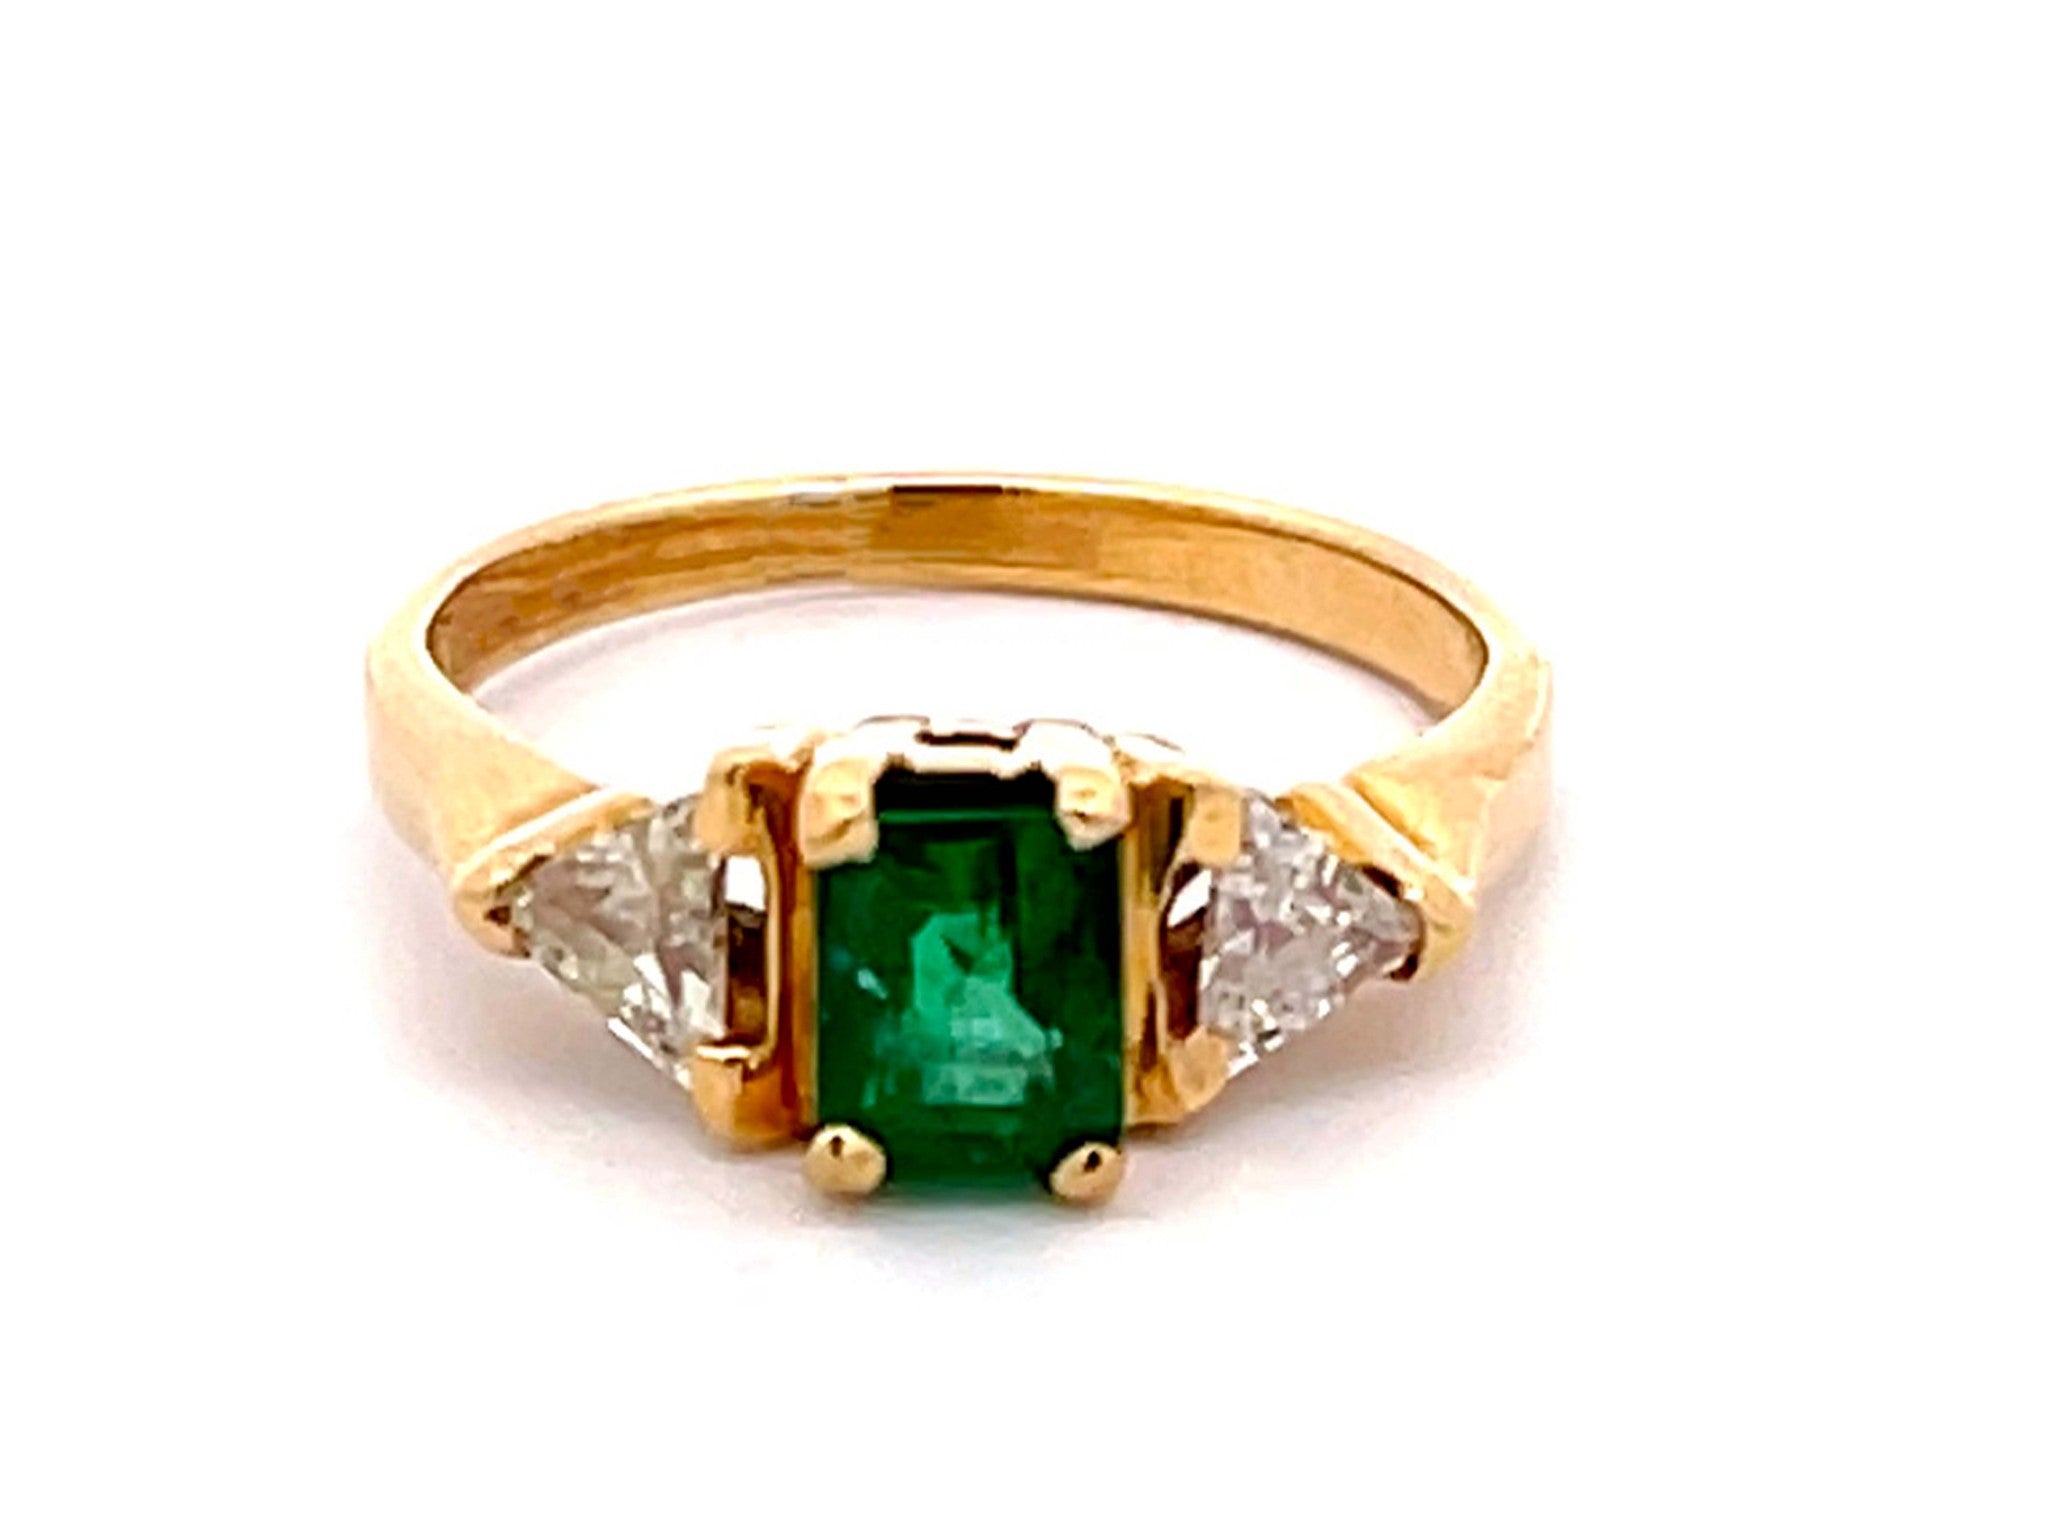 Vintage Green Emerald and Diamond Ring in 14k Yellow Gold